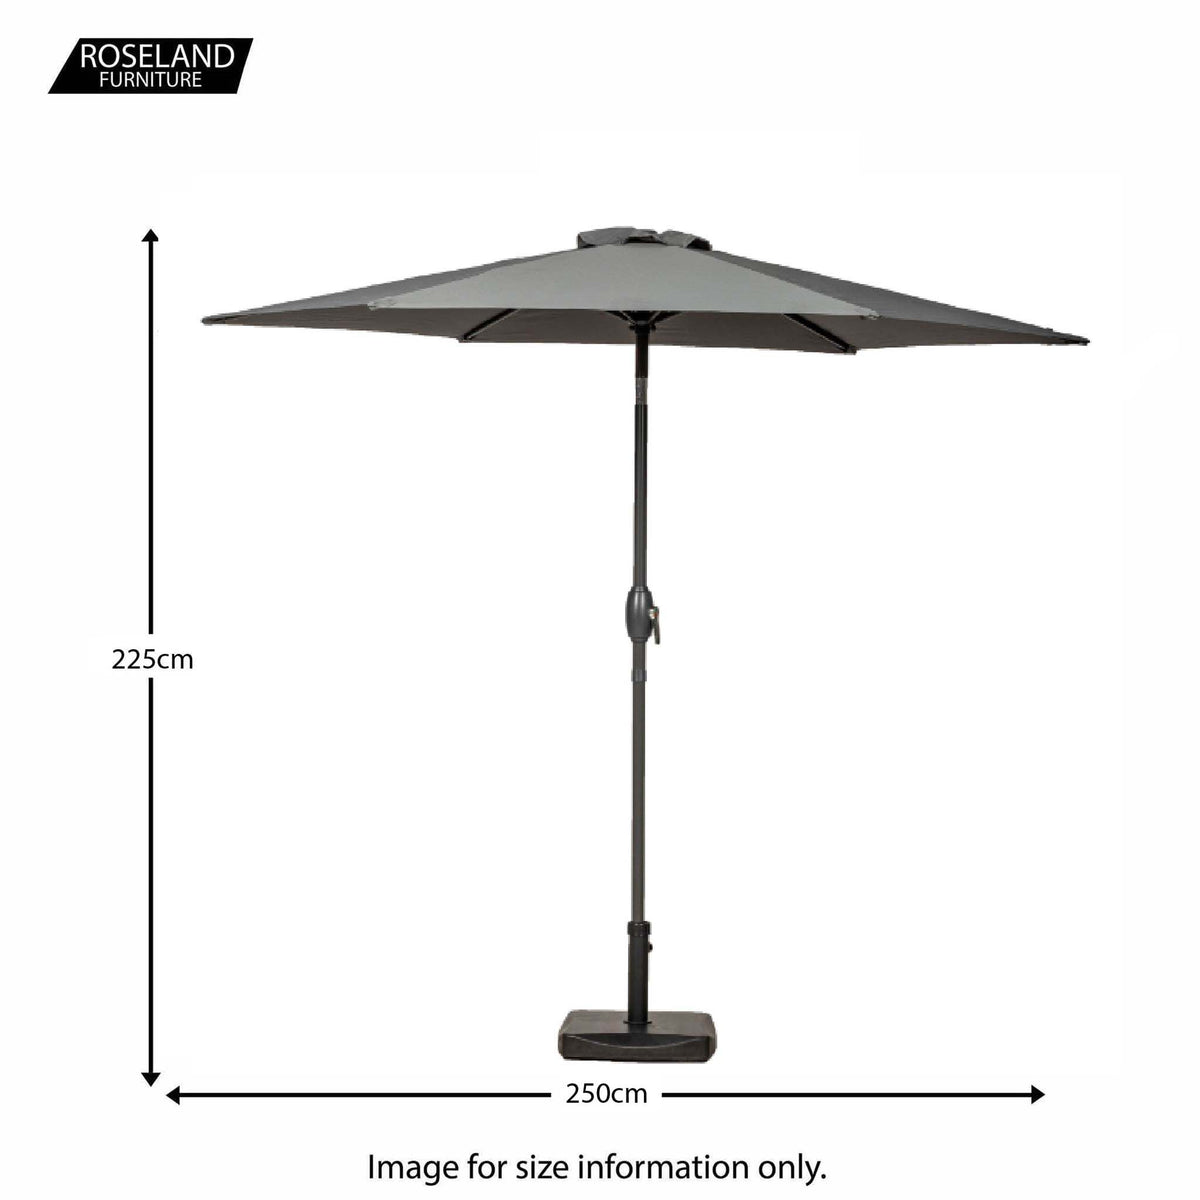 Grey 2.5m Parasol with Grey Aluminium Pole - Size Guide